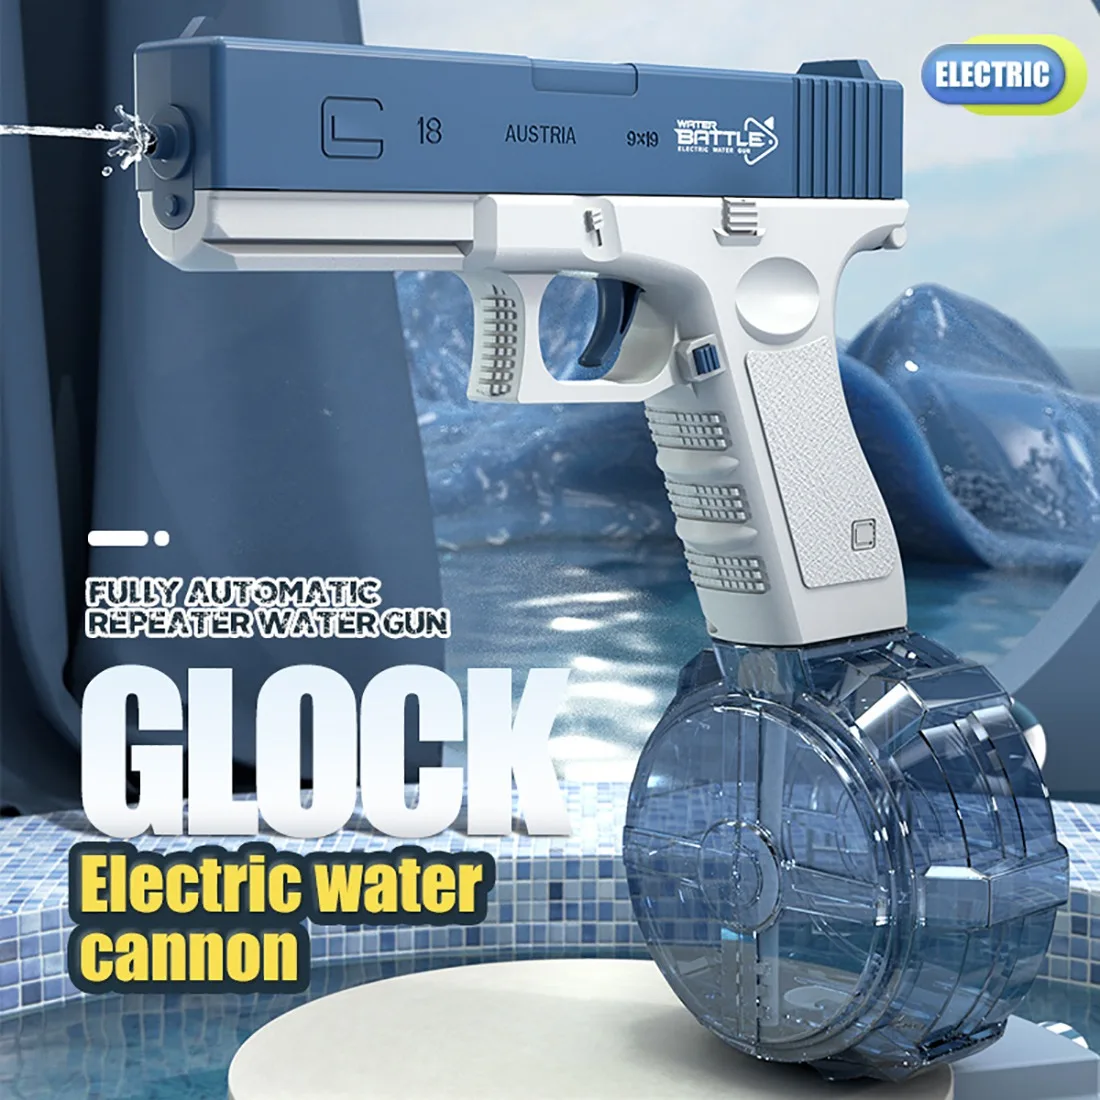 

Electric Water Gun Automatic Glock Squirt Toy Guns Water Blaster for Swimming Pool Beach Games Outdoor Fighting For Kid Birthday